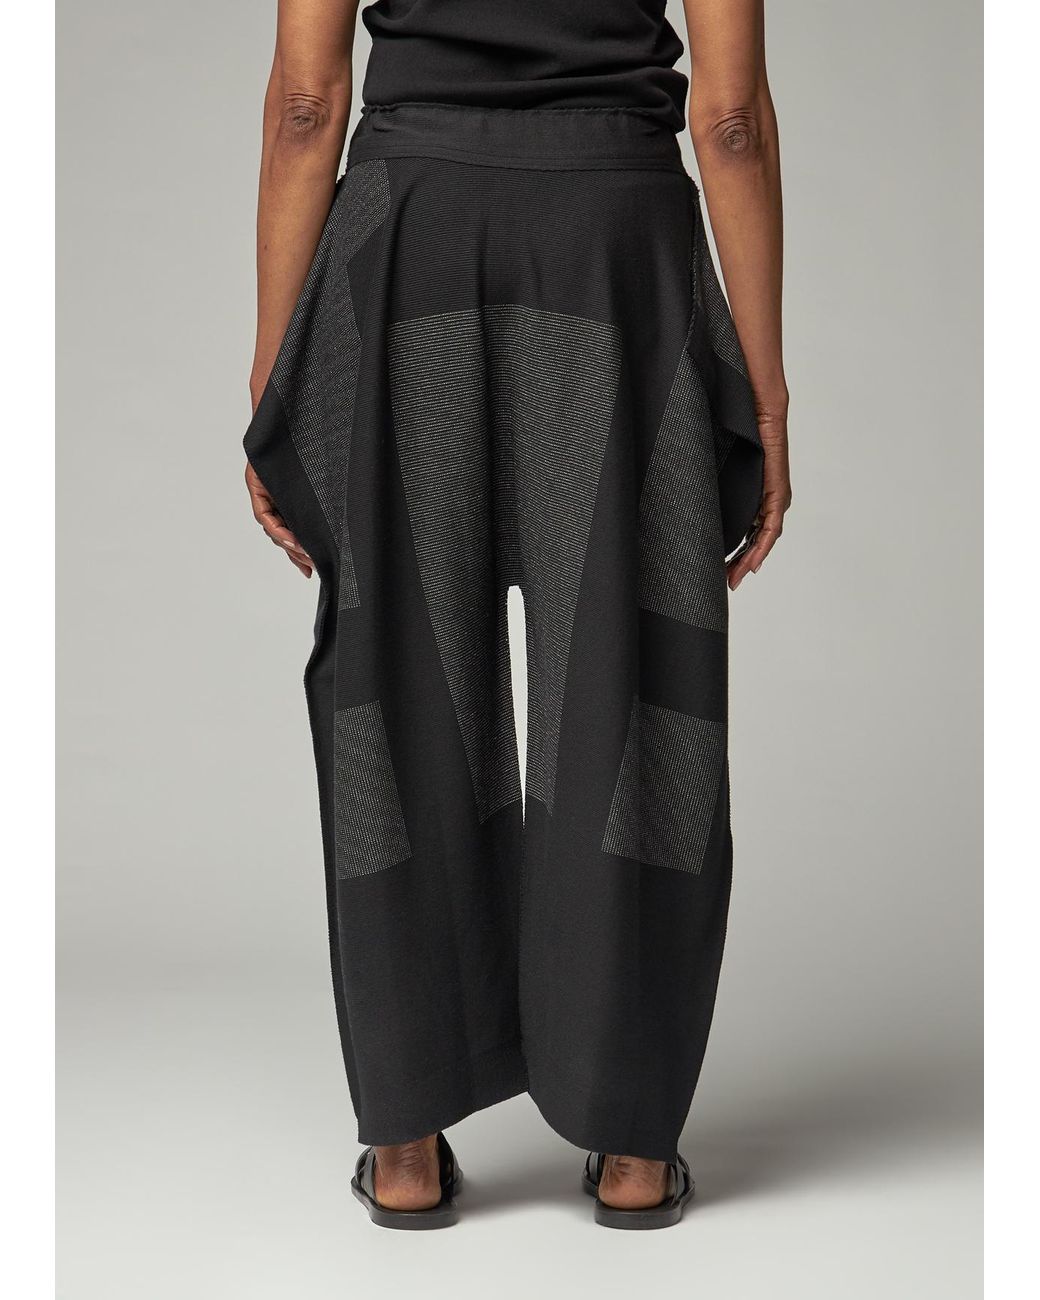 Issey Miyake Cotton Rusk Pant in Black - Lyst